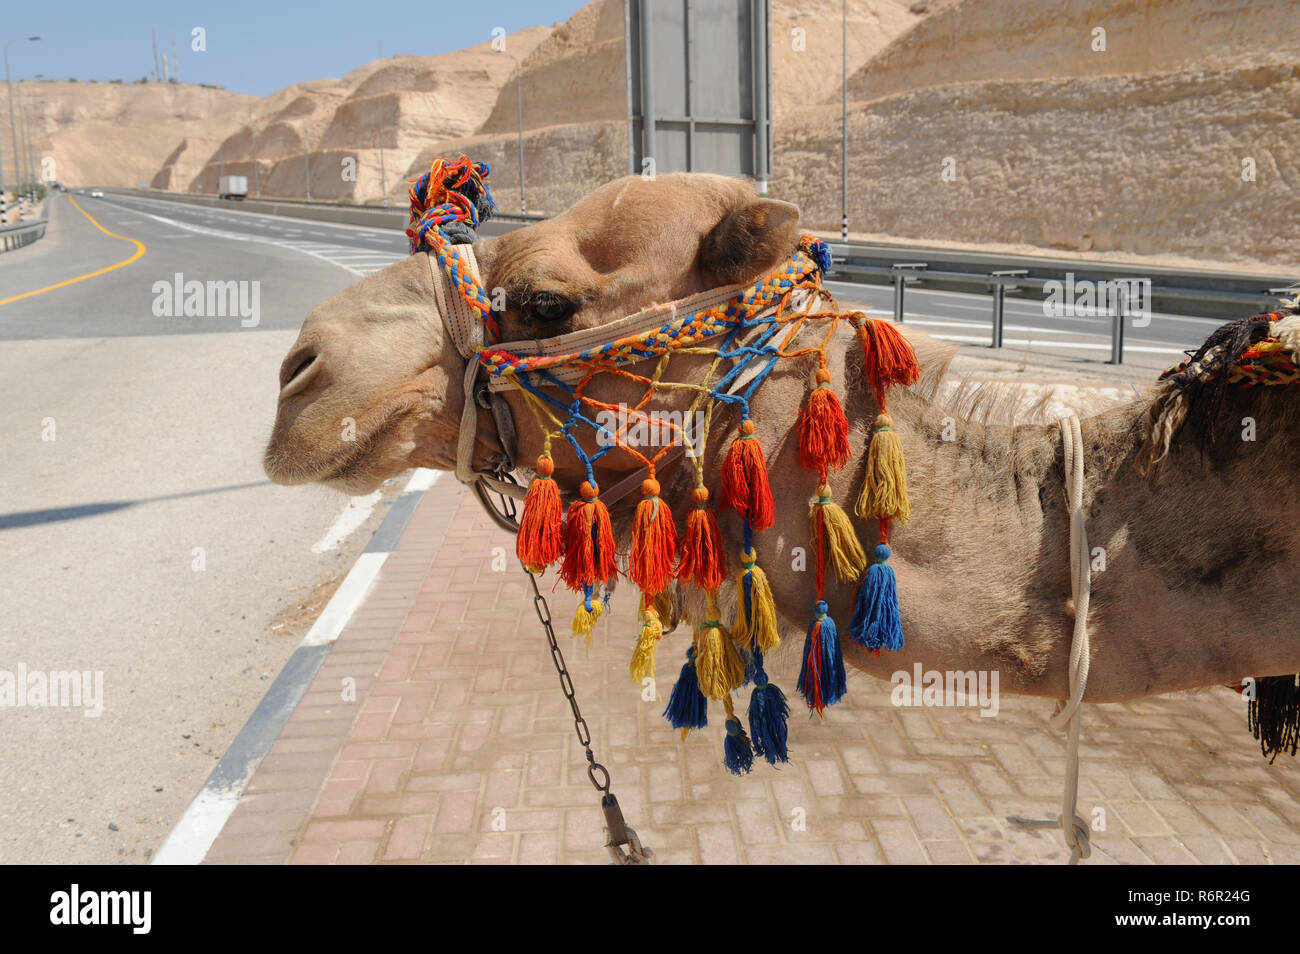 Portrait of a camel velvety snout on Israel highway 90 at busy junction to Qaser El Yahud in barren unproductive desolate part of country. Stock Photo